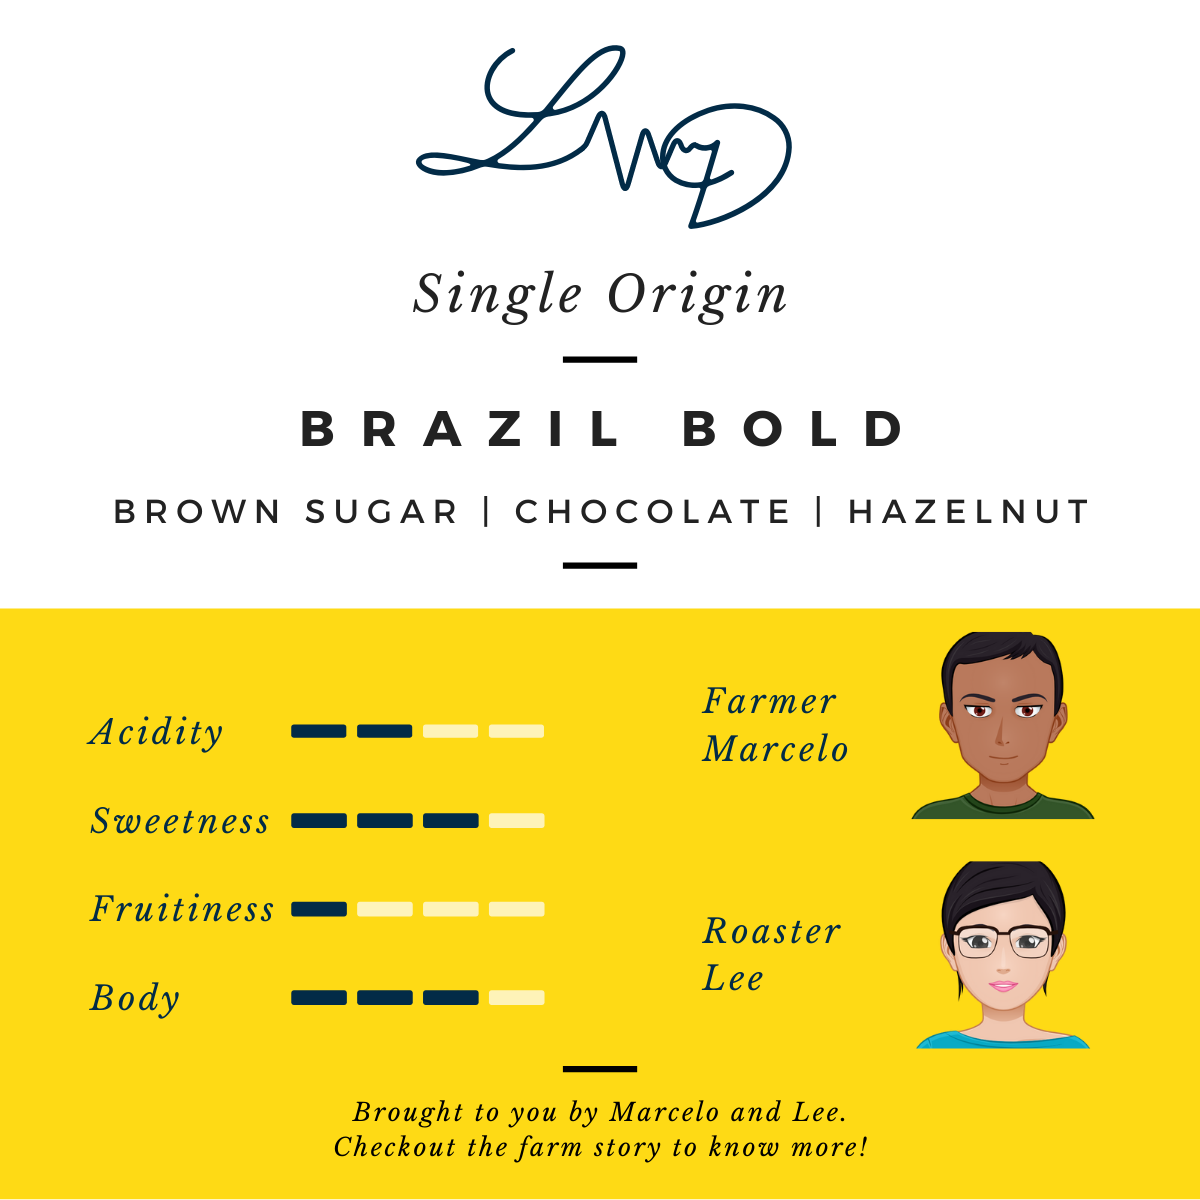 Freshly Roasted Brazil Specialty Coffee by LivDiff. Chocolate, Hazelnut and Brown Sugar flavour profile